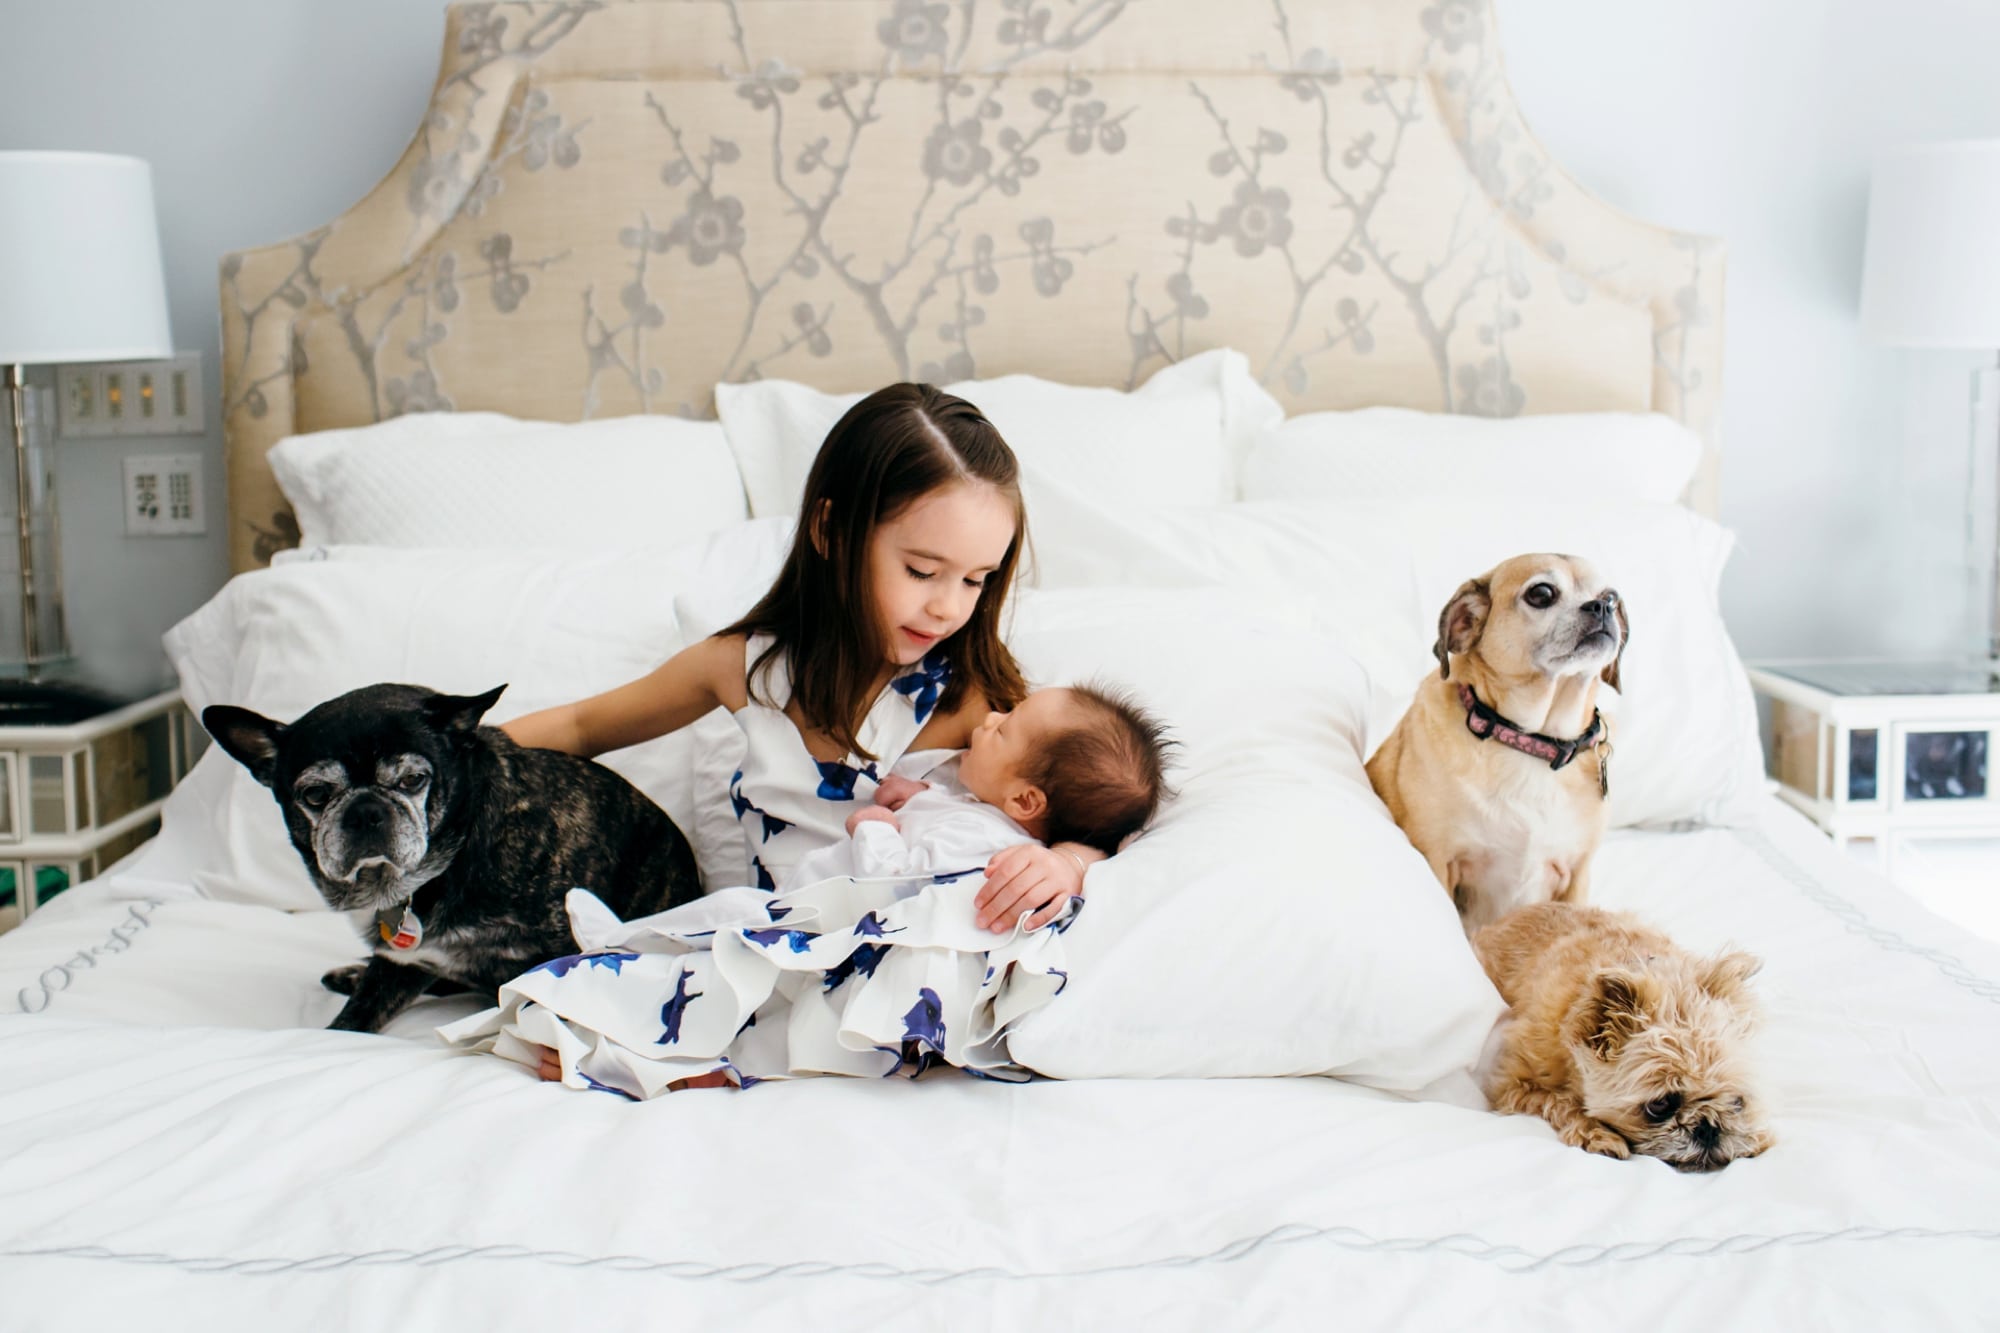 Big sister holding little sister with dogs Weston newborn photographer